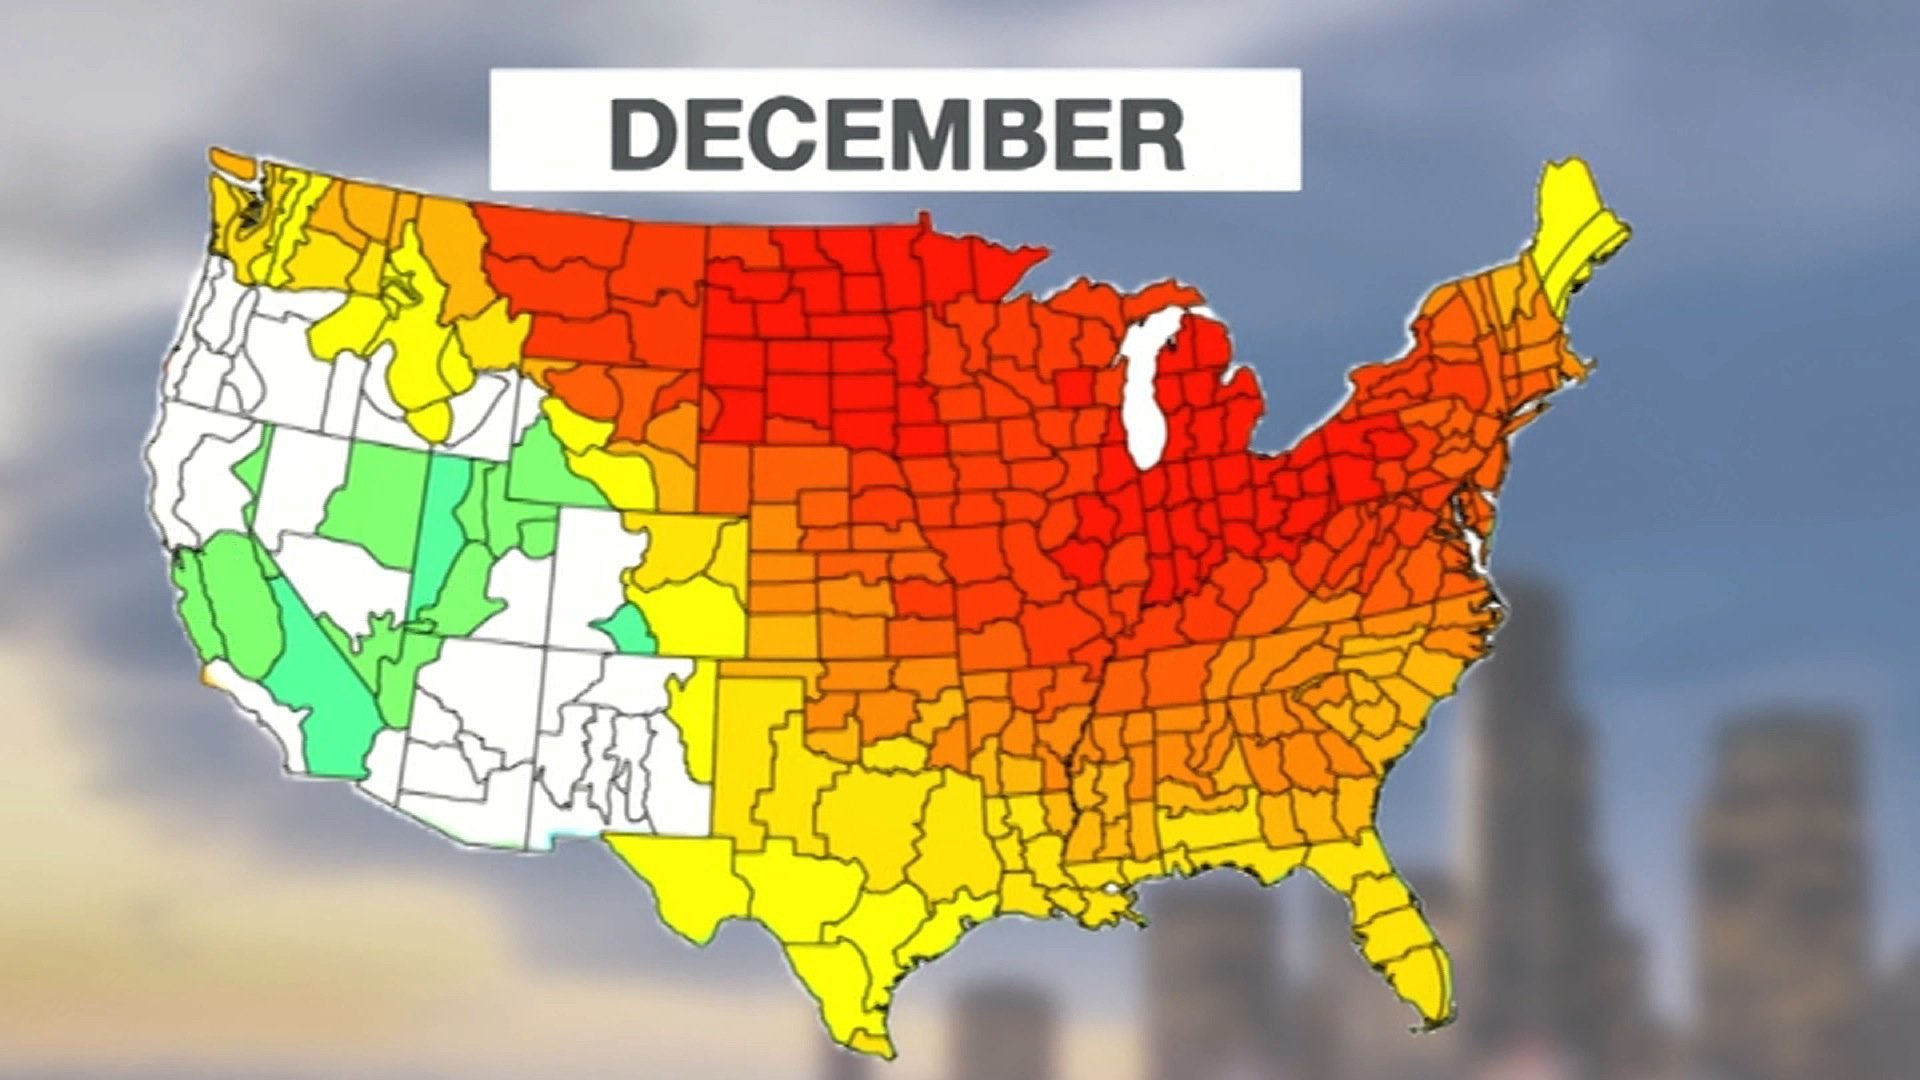 In December 2015. there have been more than 2,600 record high temperatures recorded and less than 150 record lows.